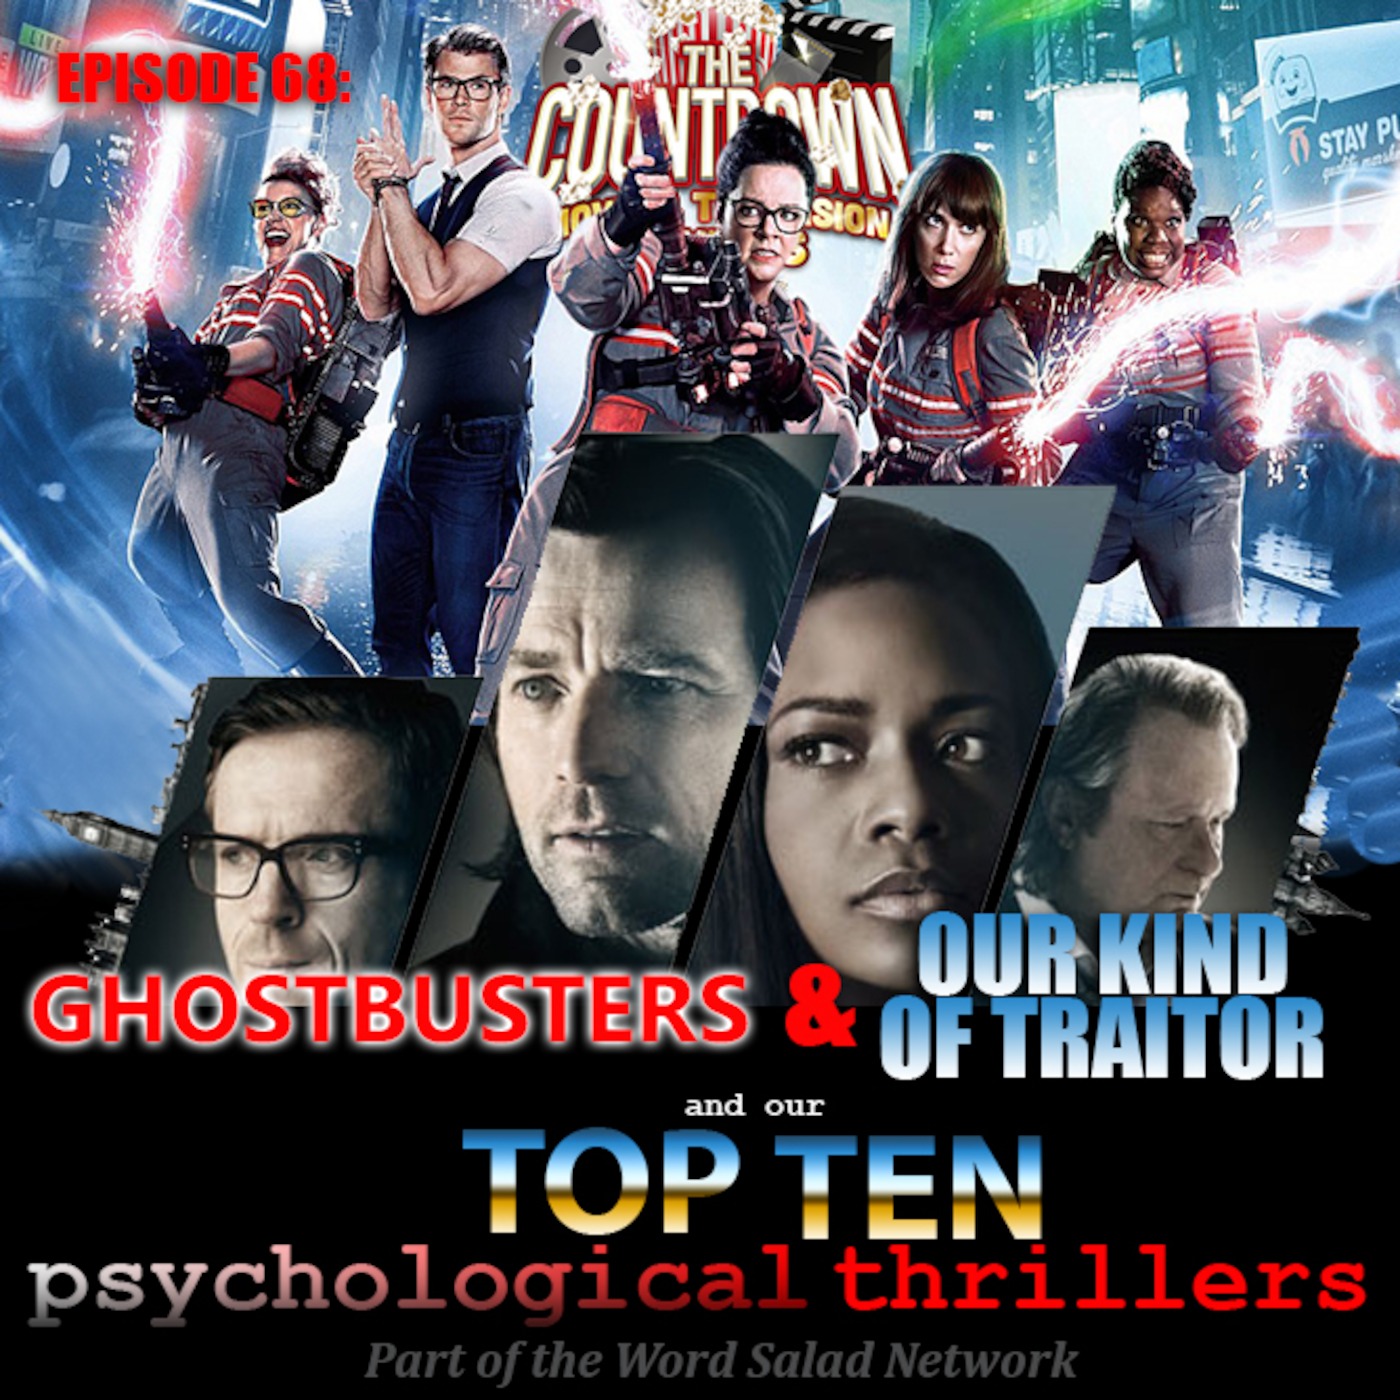 Episode 68: Top 10 Psychological Thrillers / Ghostbusters / Our Kind of Traitor